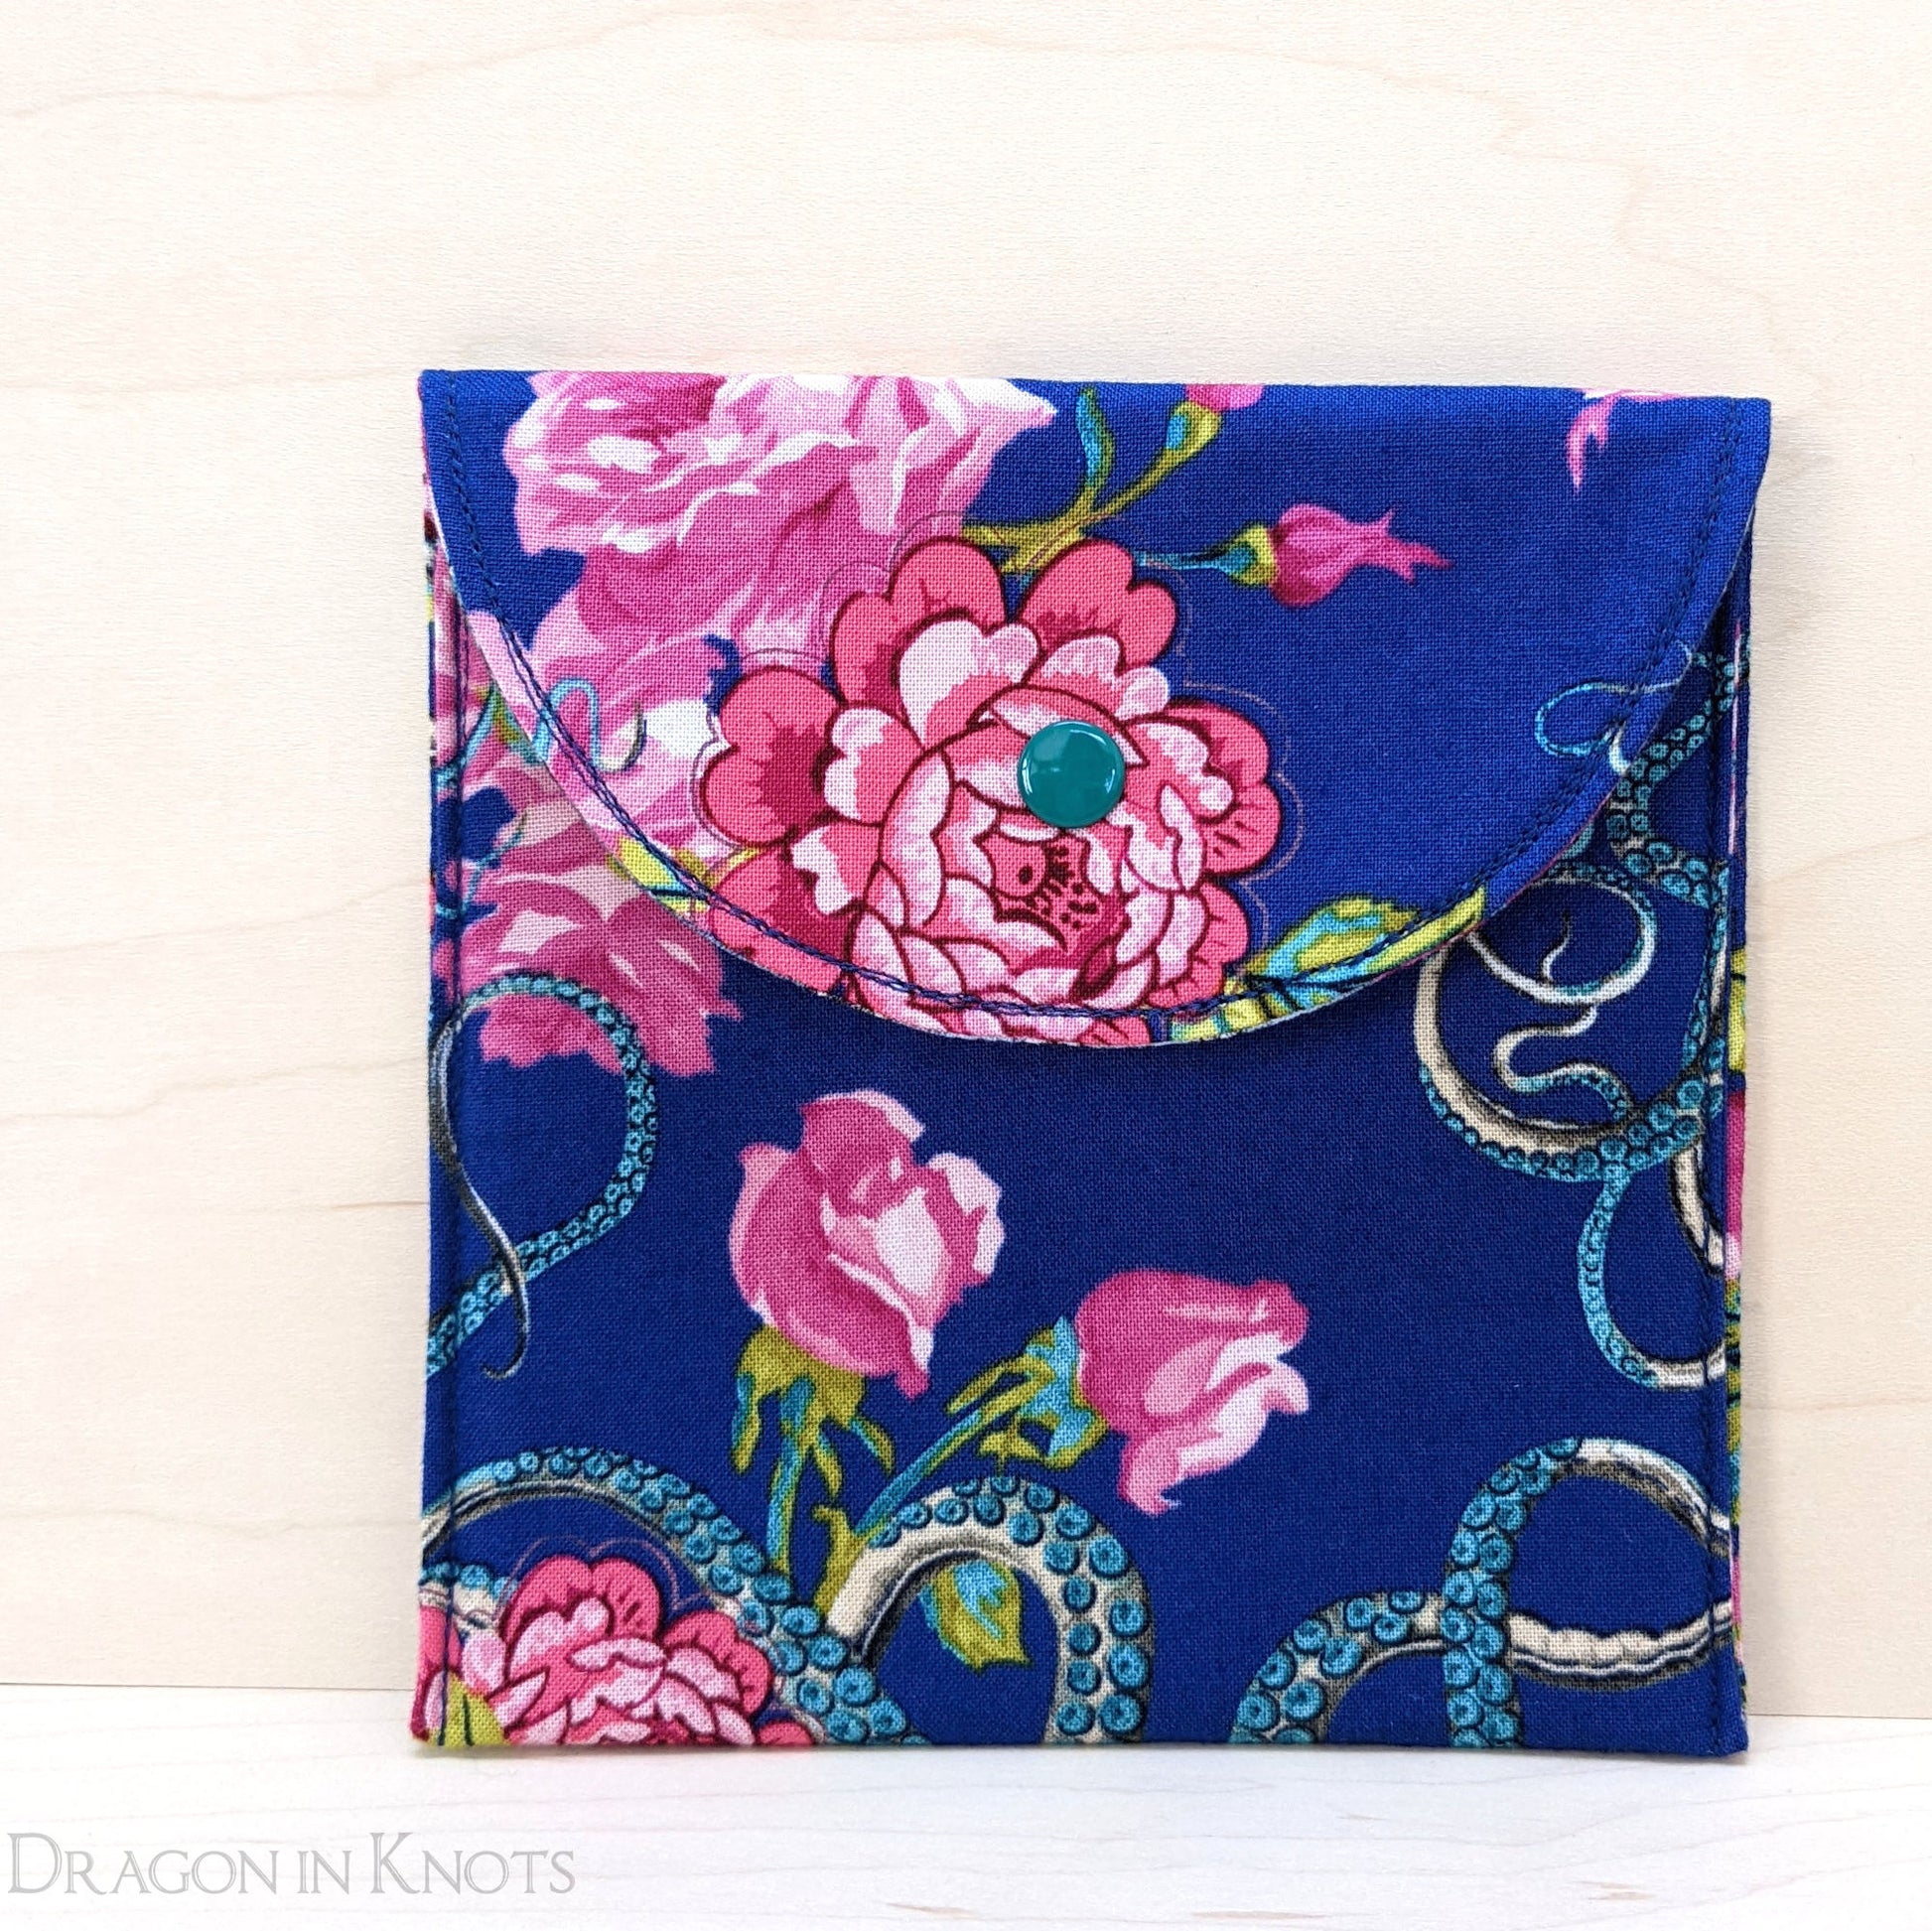 Octopus and Roses - 5" Accessory Pouch - Dragon in Knots handmade